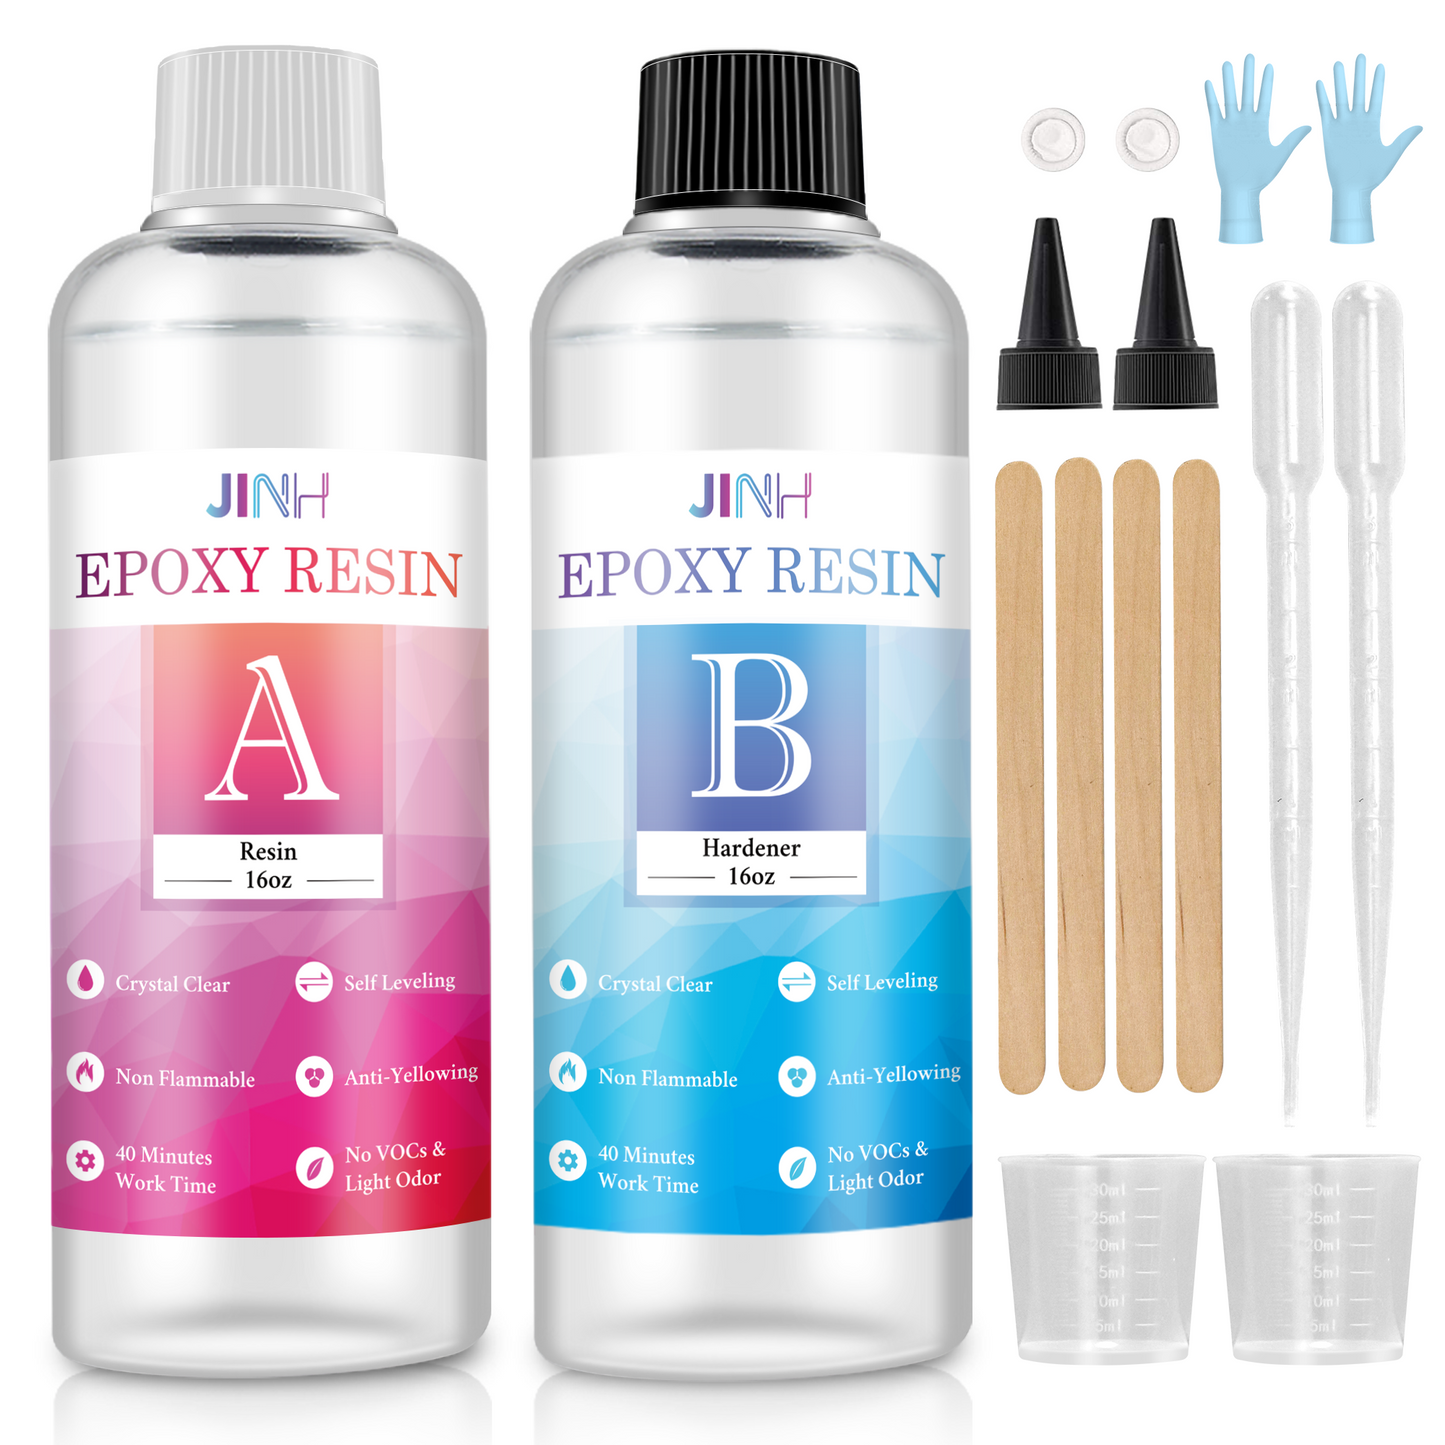 JINH 32oz Epoxy Resin Kit Casting and Coating for River Table Tops, 2 Part Epoxy Art Resin Clear Casting Resin Jewelry Resin 32 Ounce Kit,Handmade Art,Jewelry Projects,Casting Molds